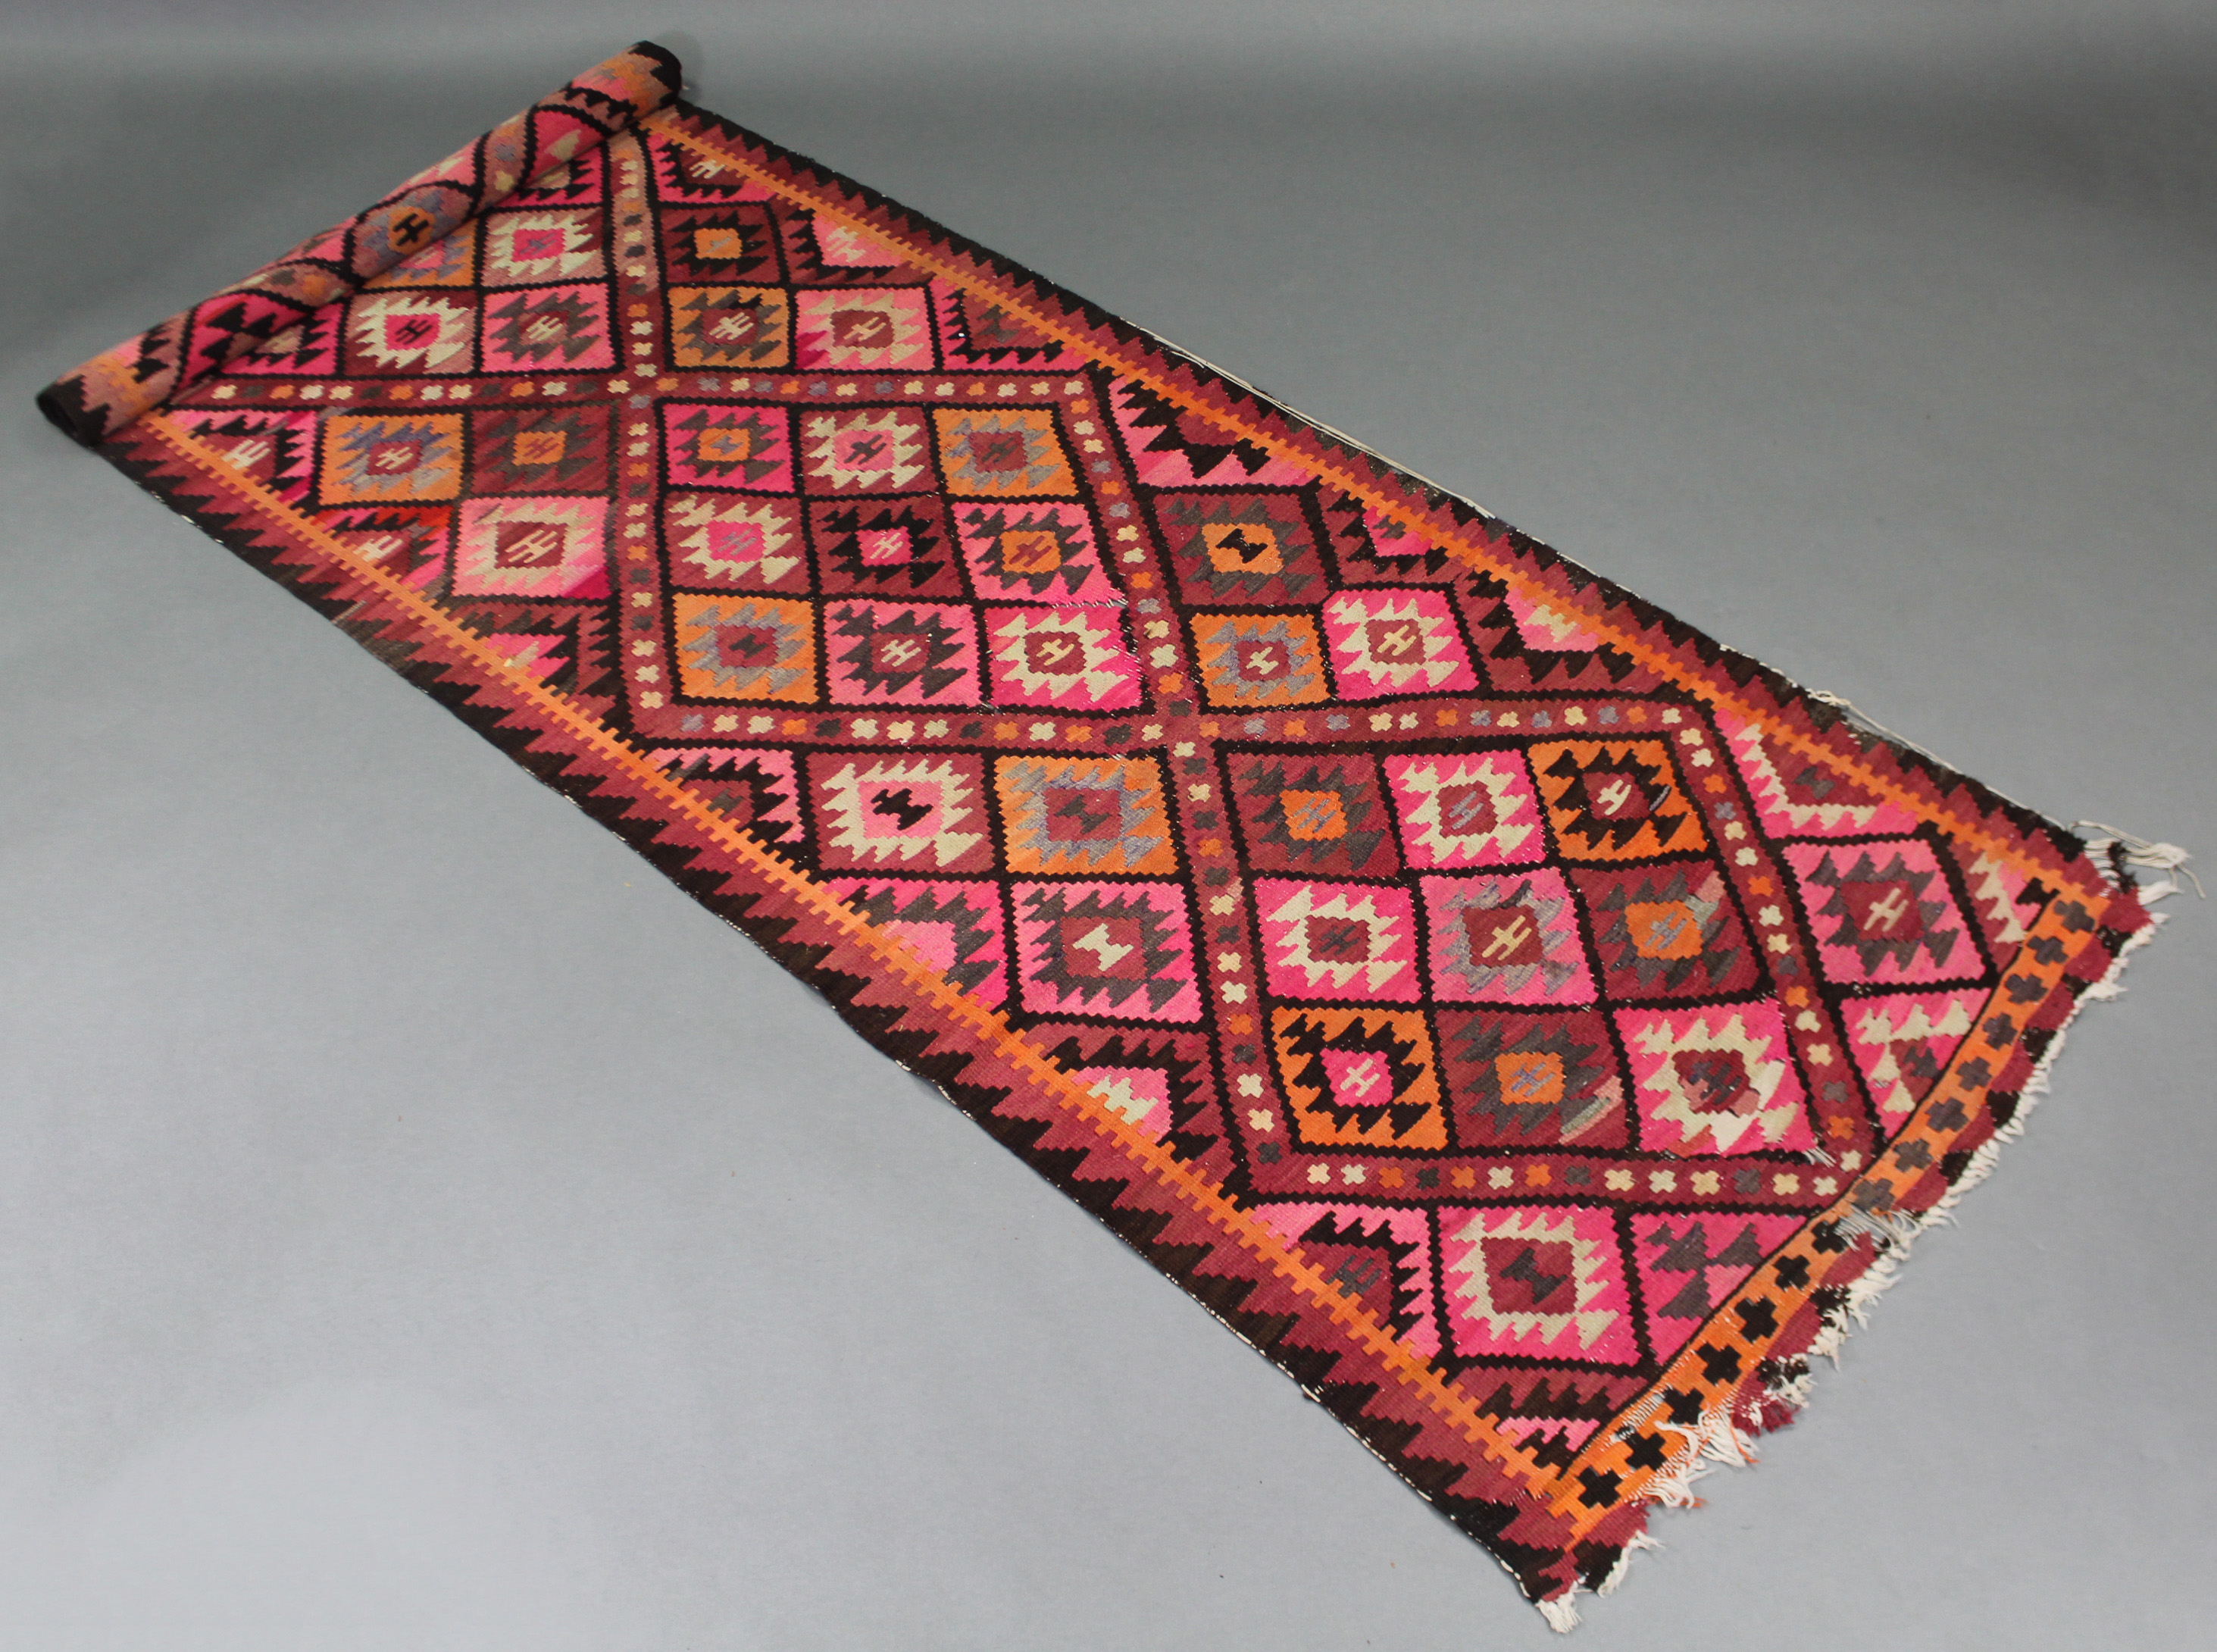 A Kelim runner of pink ground, with all-over geometric lozenge design; 11’ x 3’ 4” (worn).